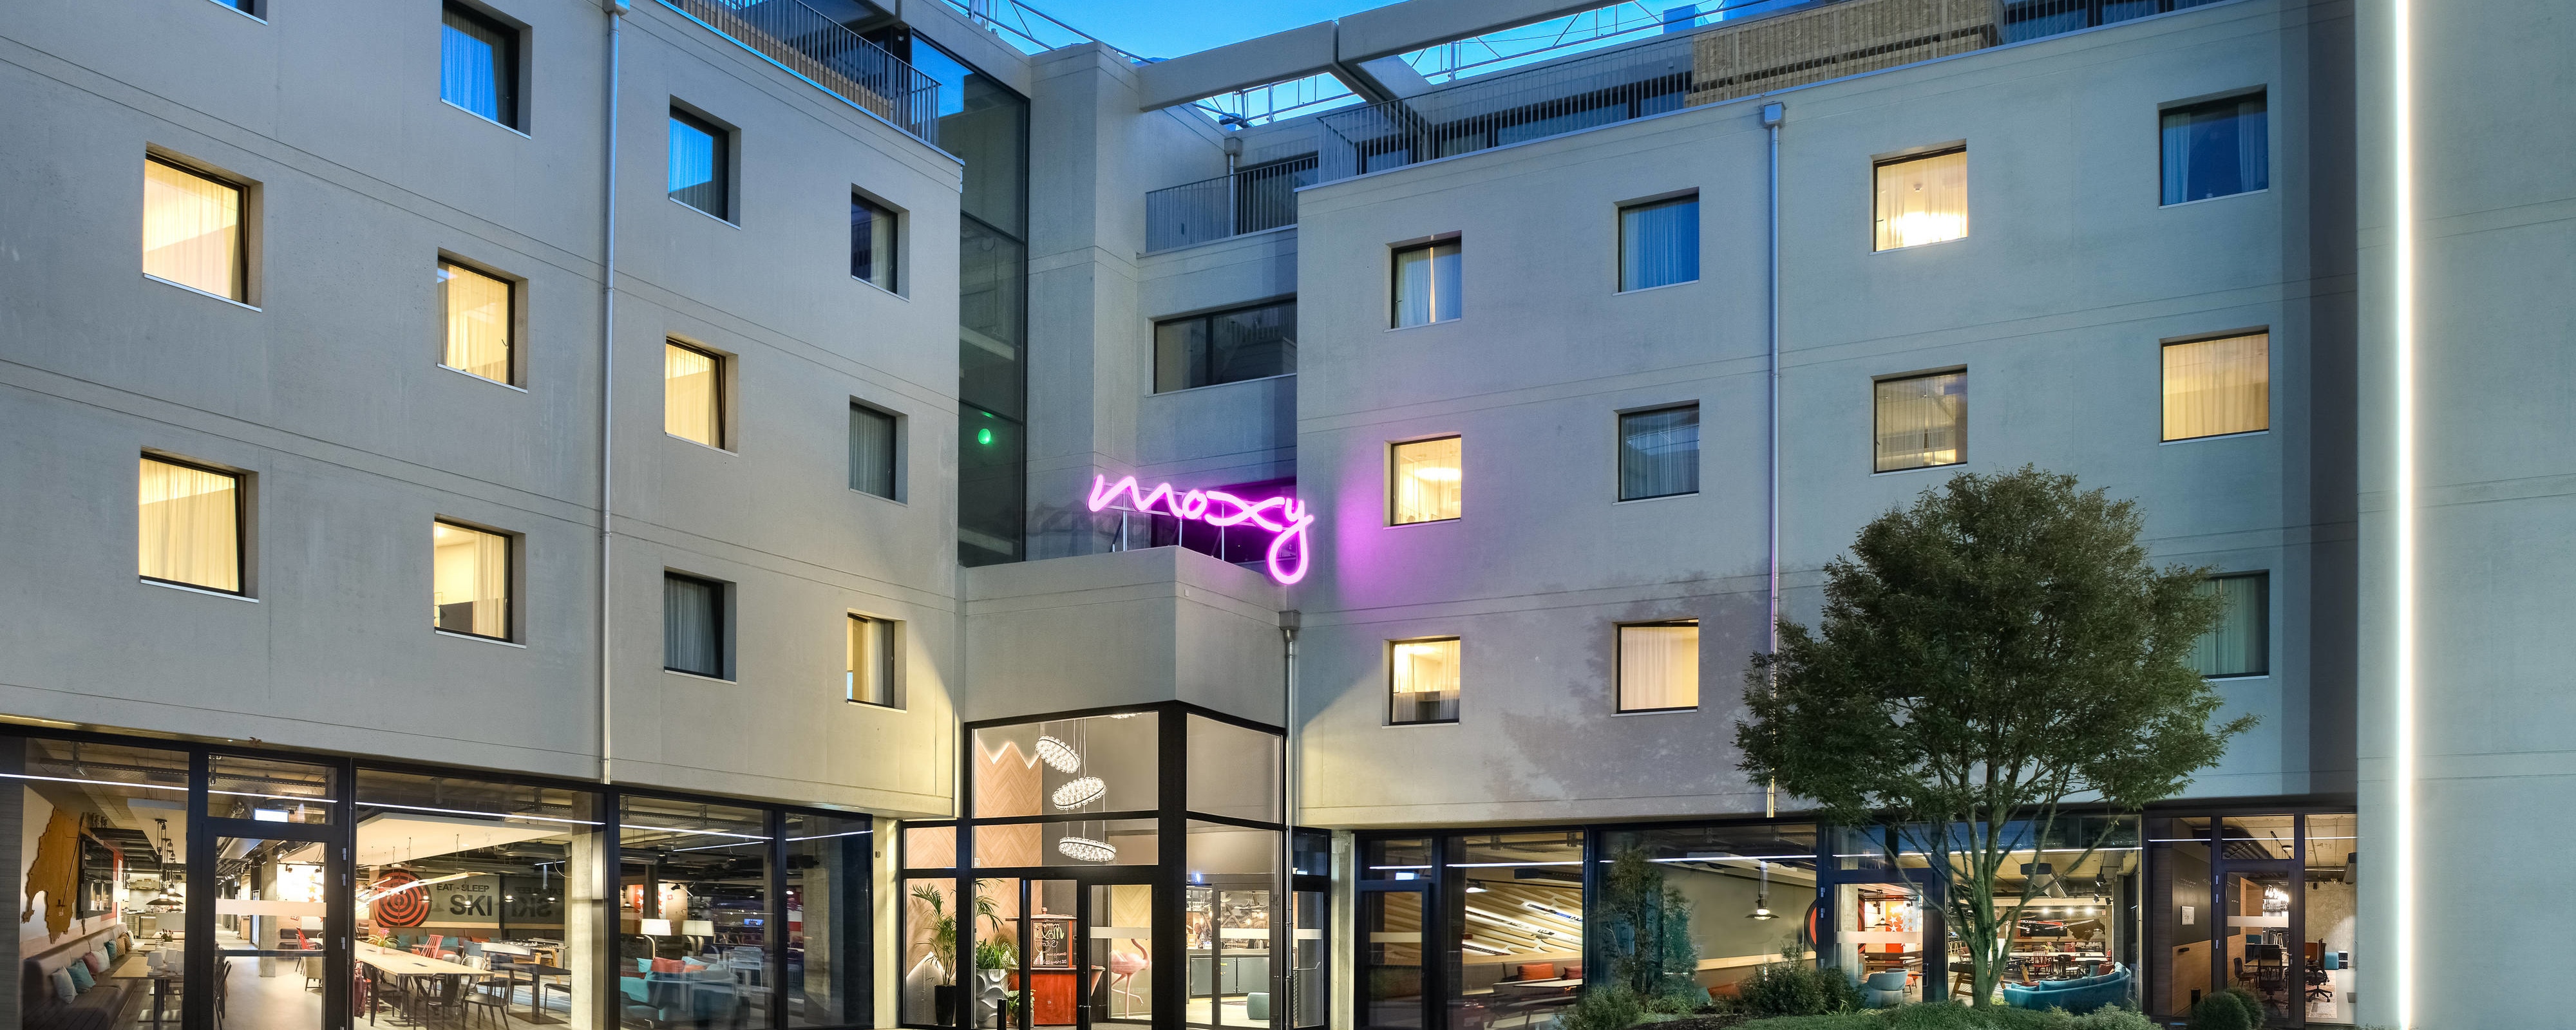 Image for Moxy Sion, a Marriott hotel.